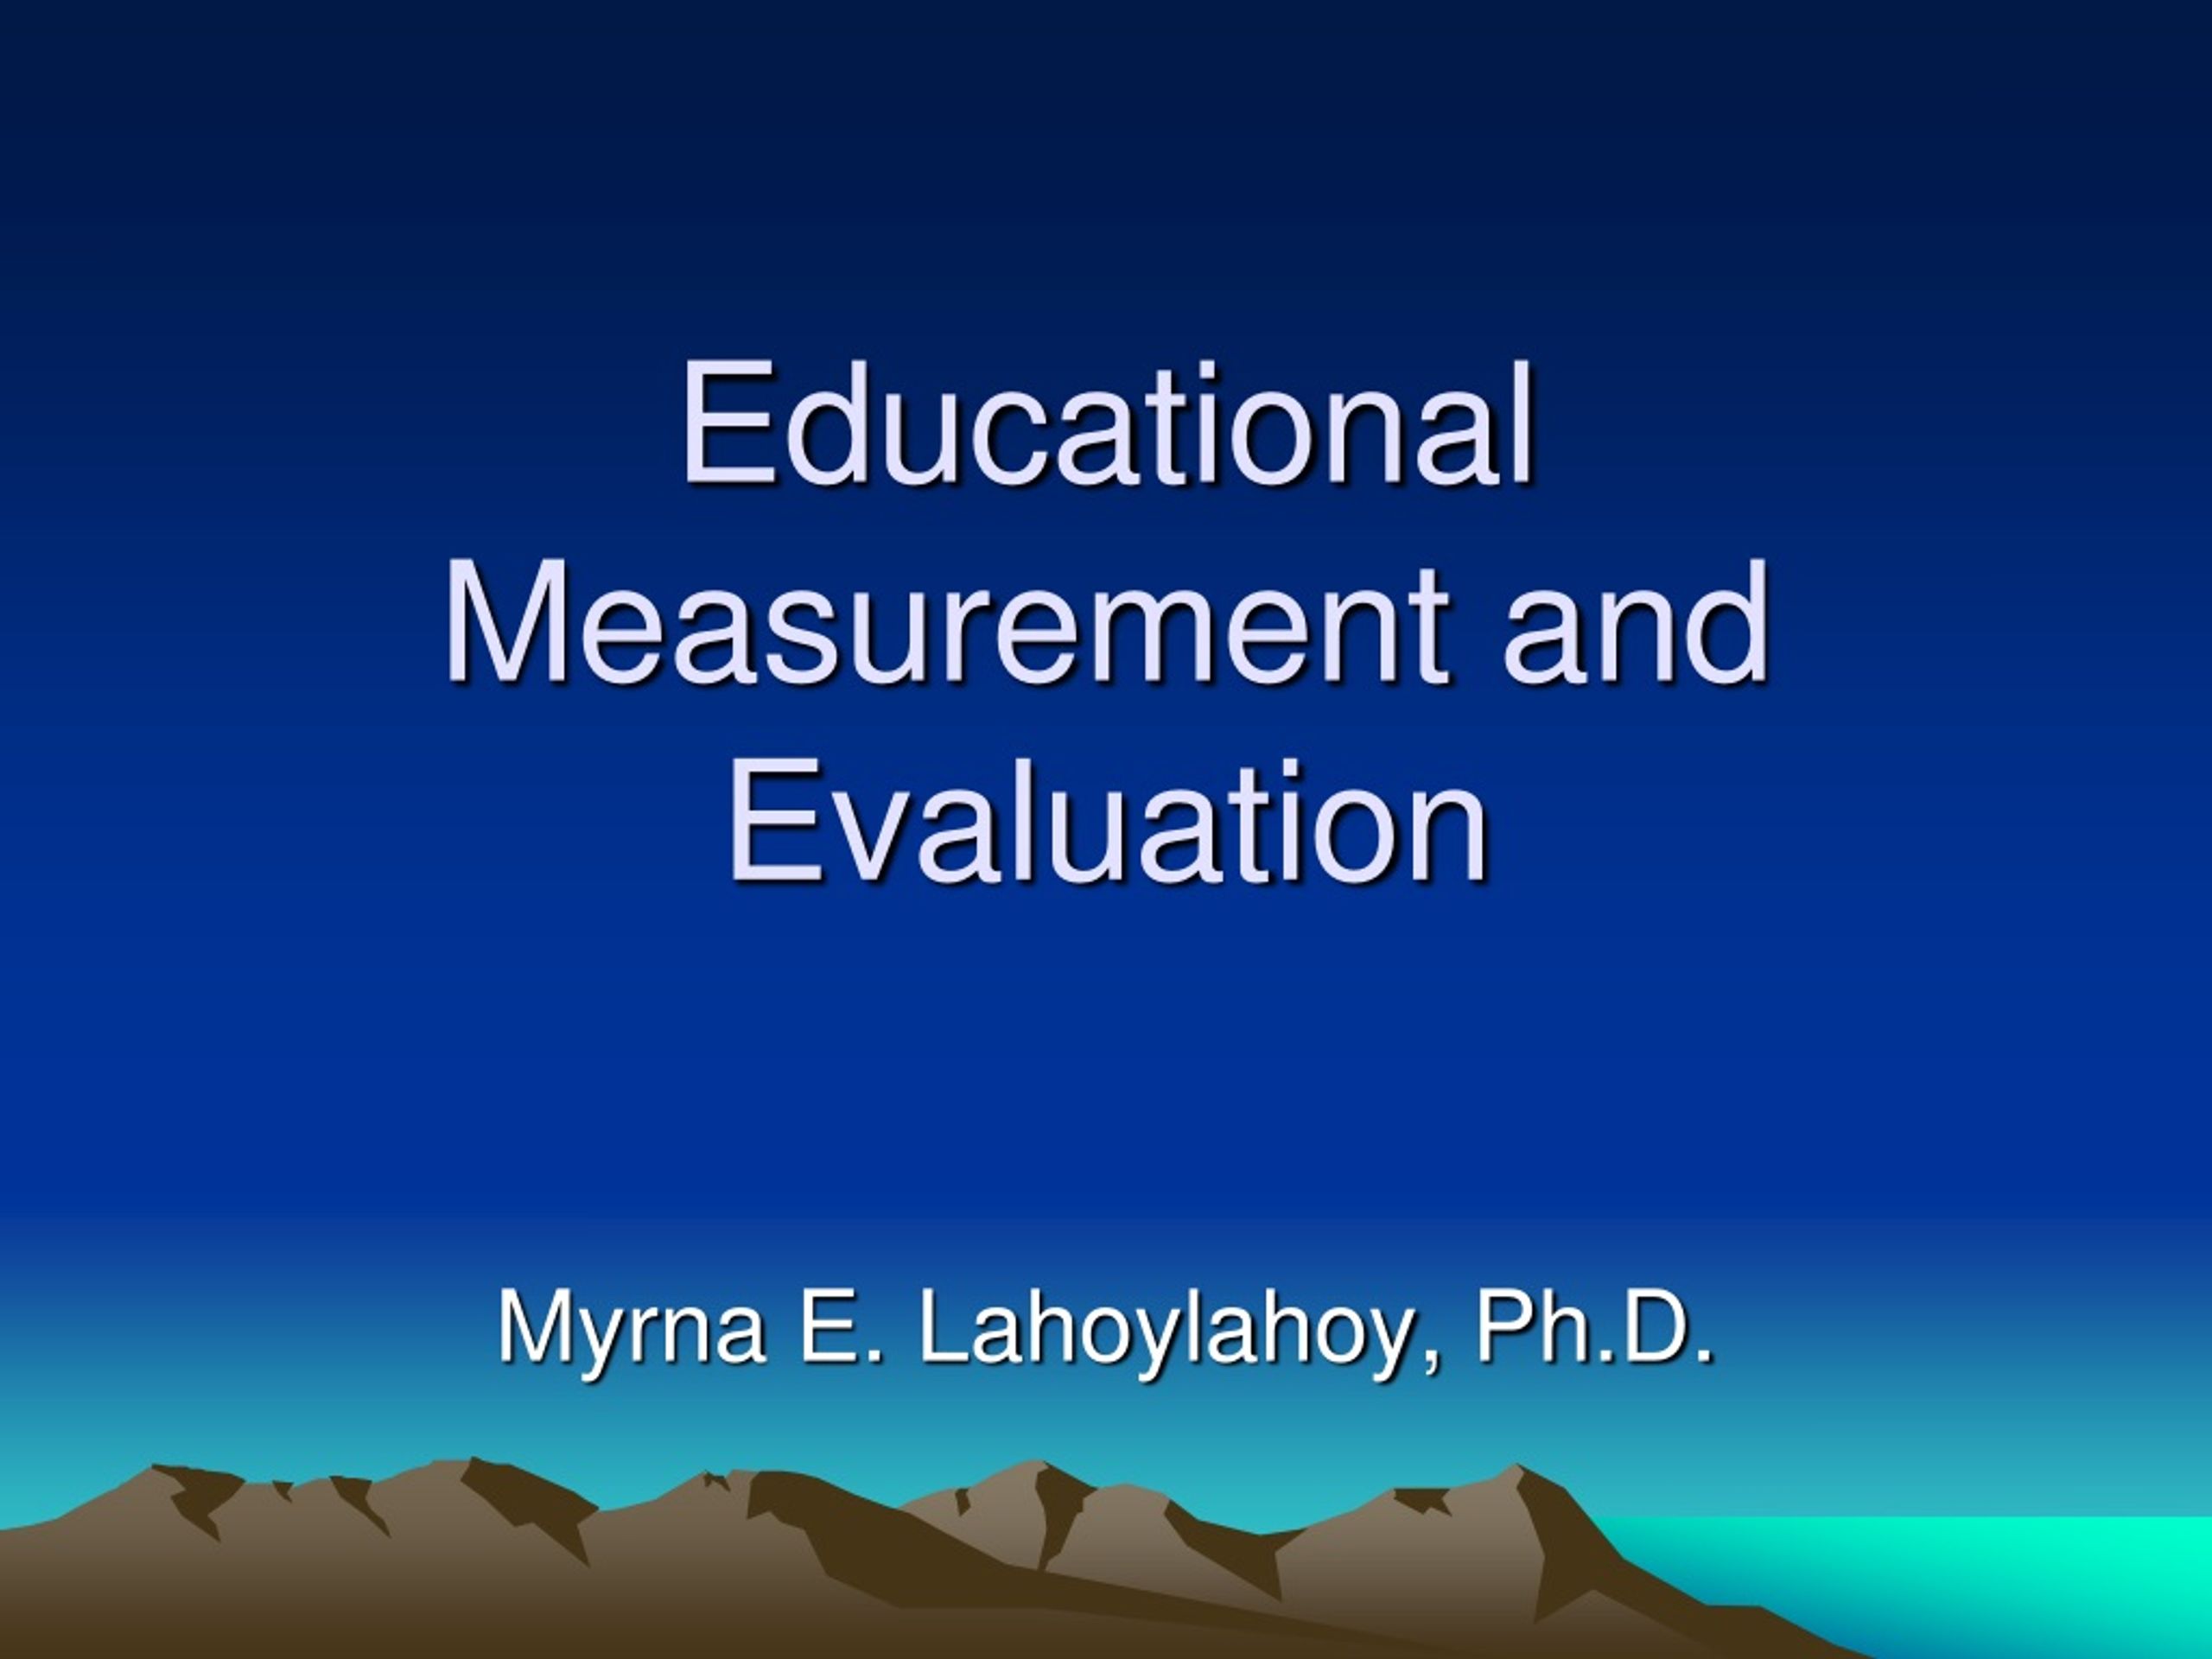 phd in educational measurement and evaluation